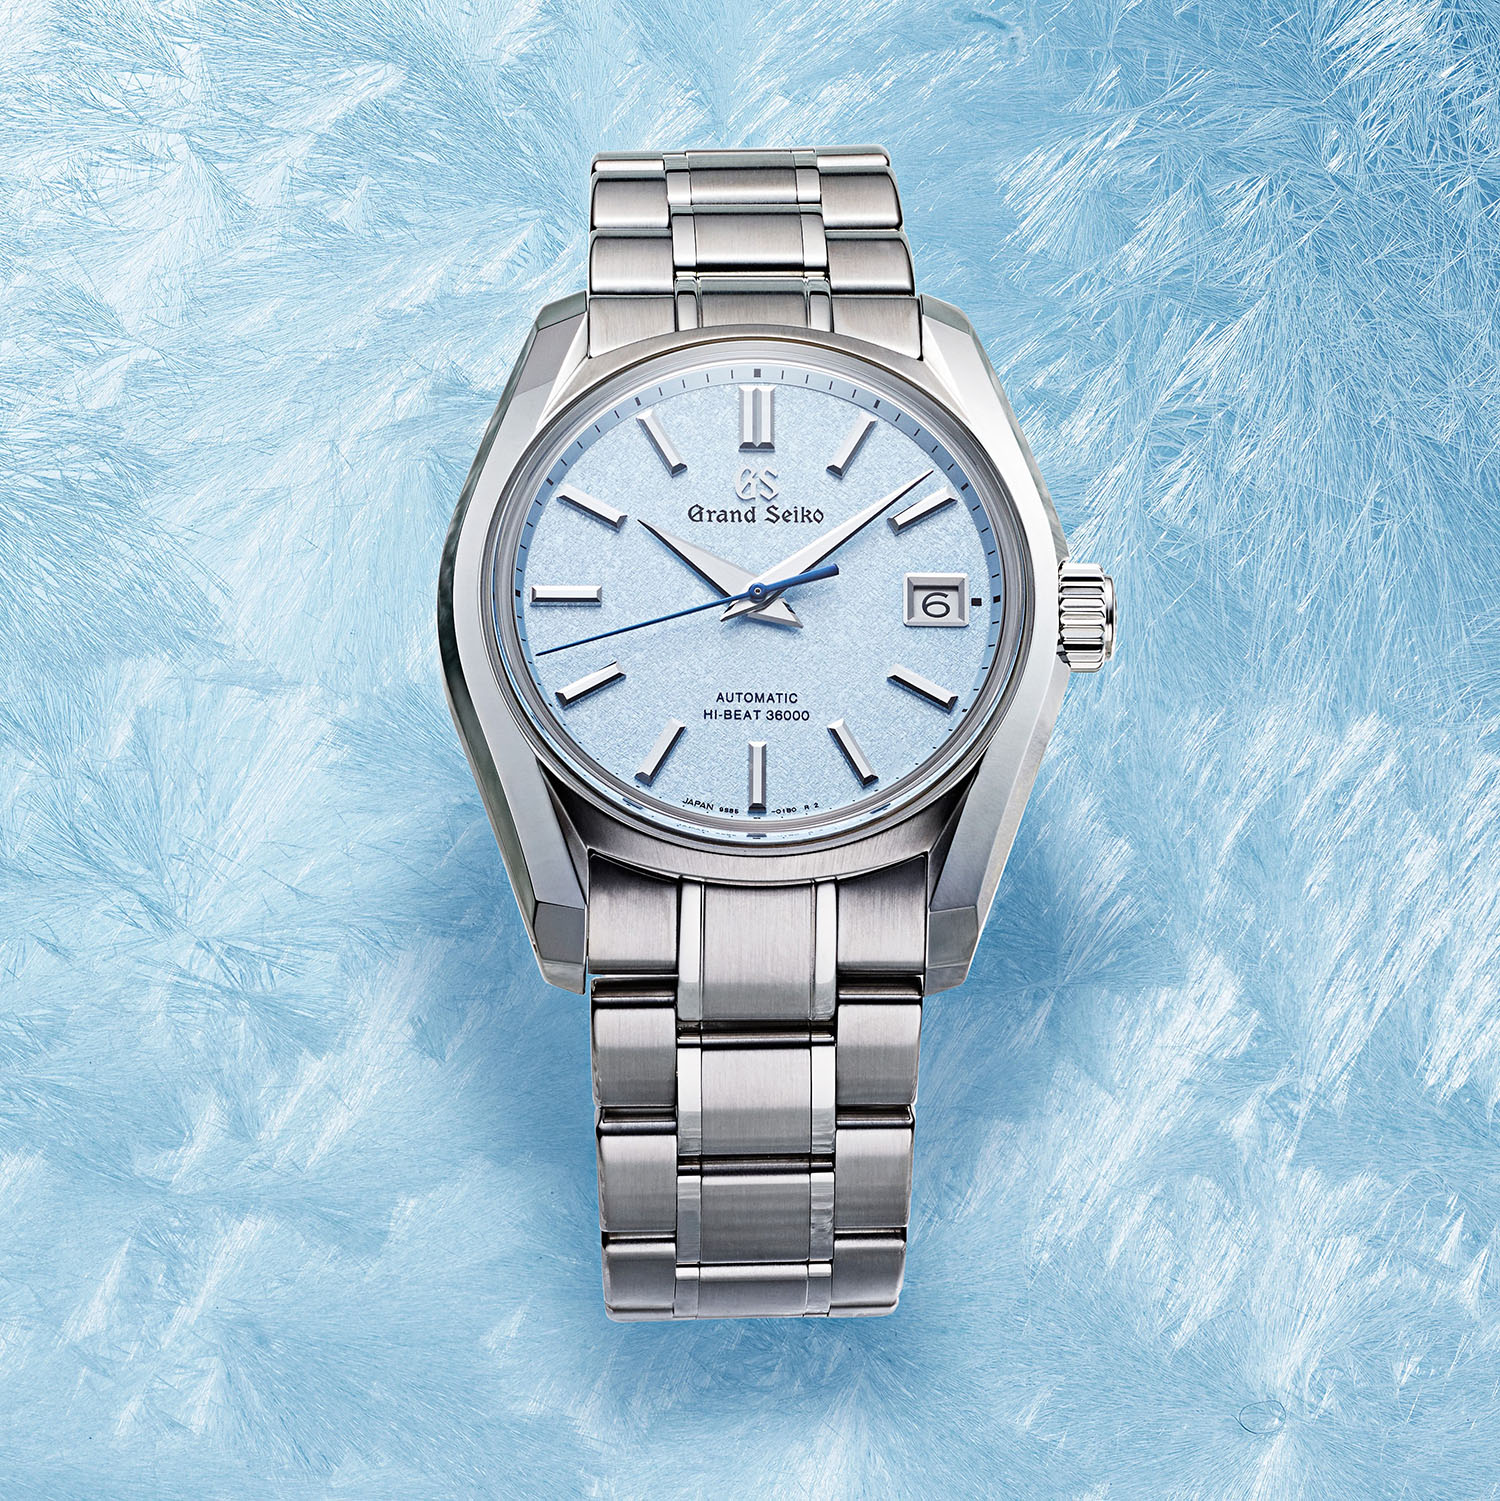 Introducing The Grand Seiko Heritage “Soko” Frost US Exclusive SBGA471 And  SBGH295 Watches